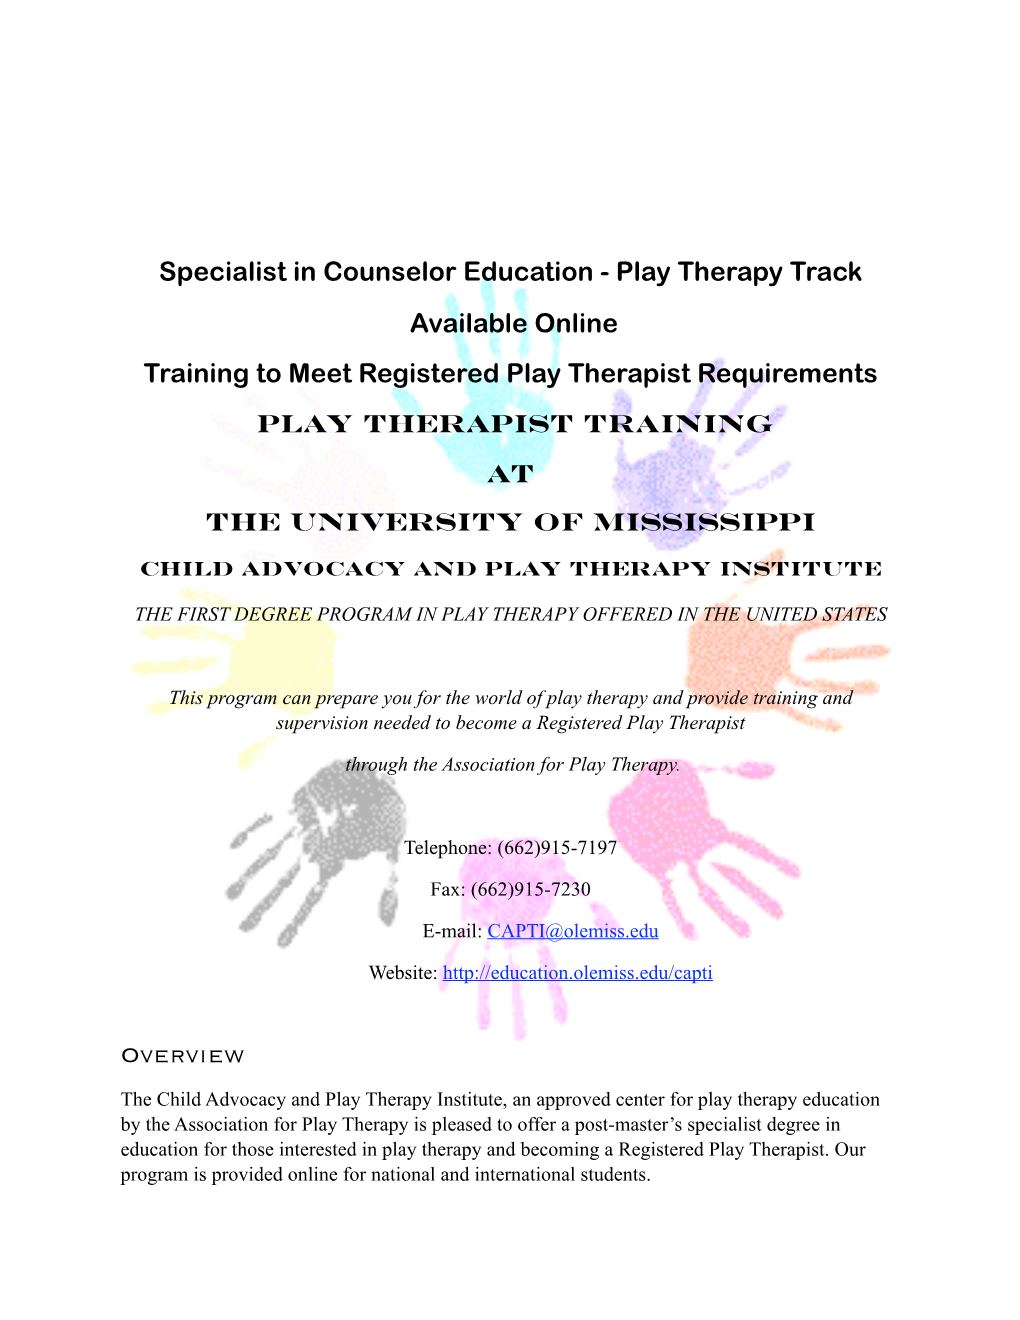 Specialist in Counselor Education - Play Therapy Track Available Online Training to Meet Registered Play Therapist Requirements